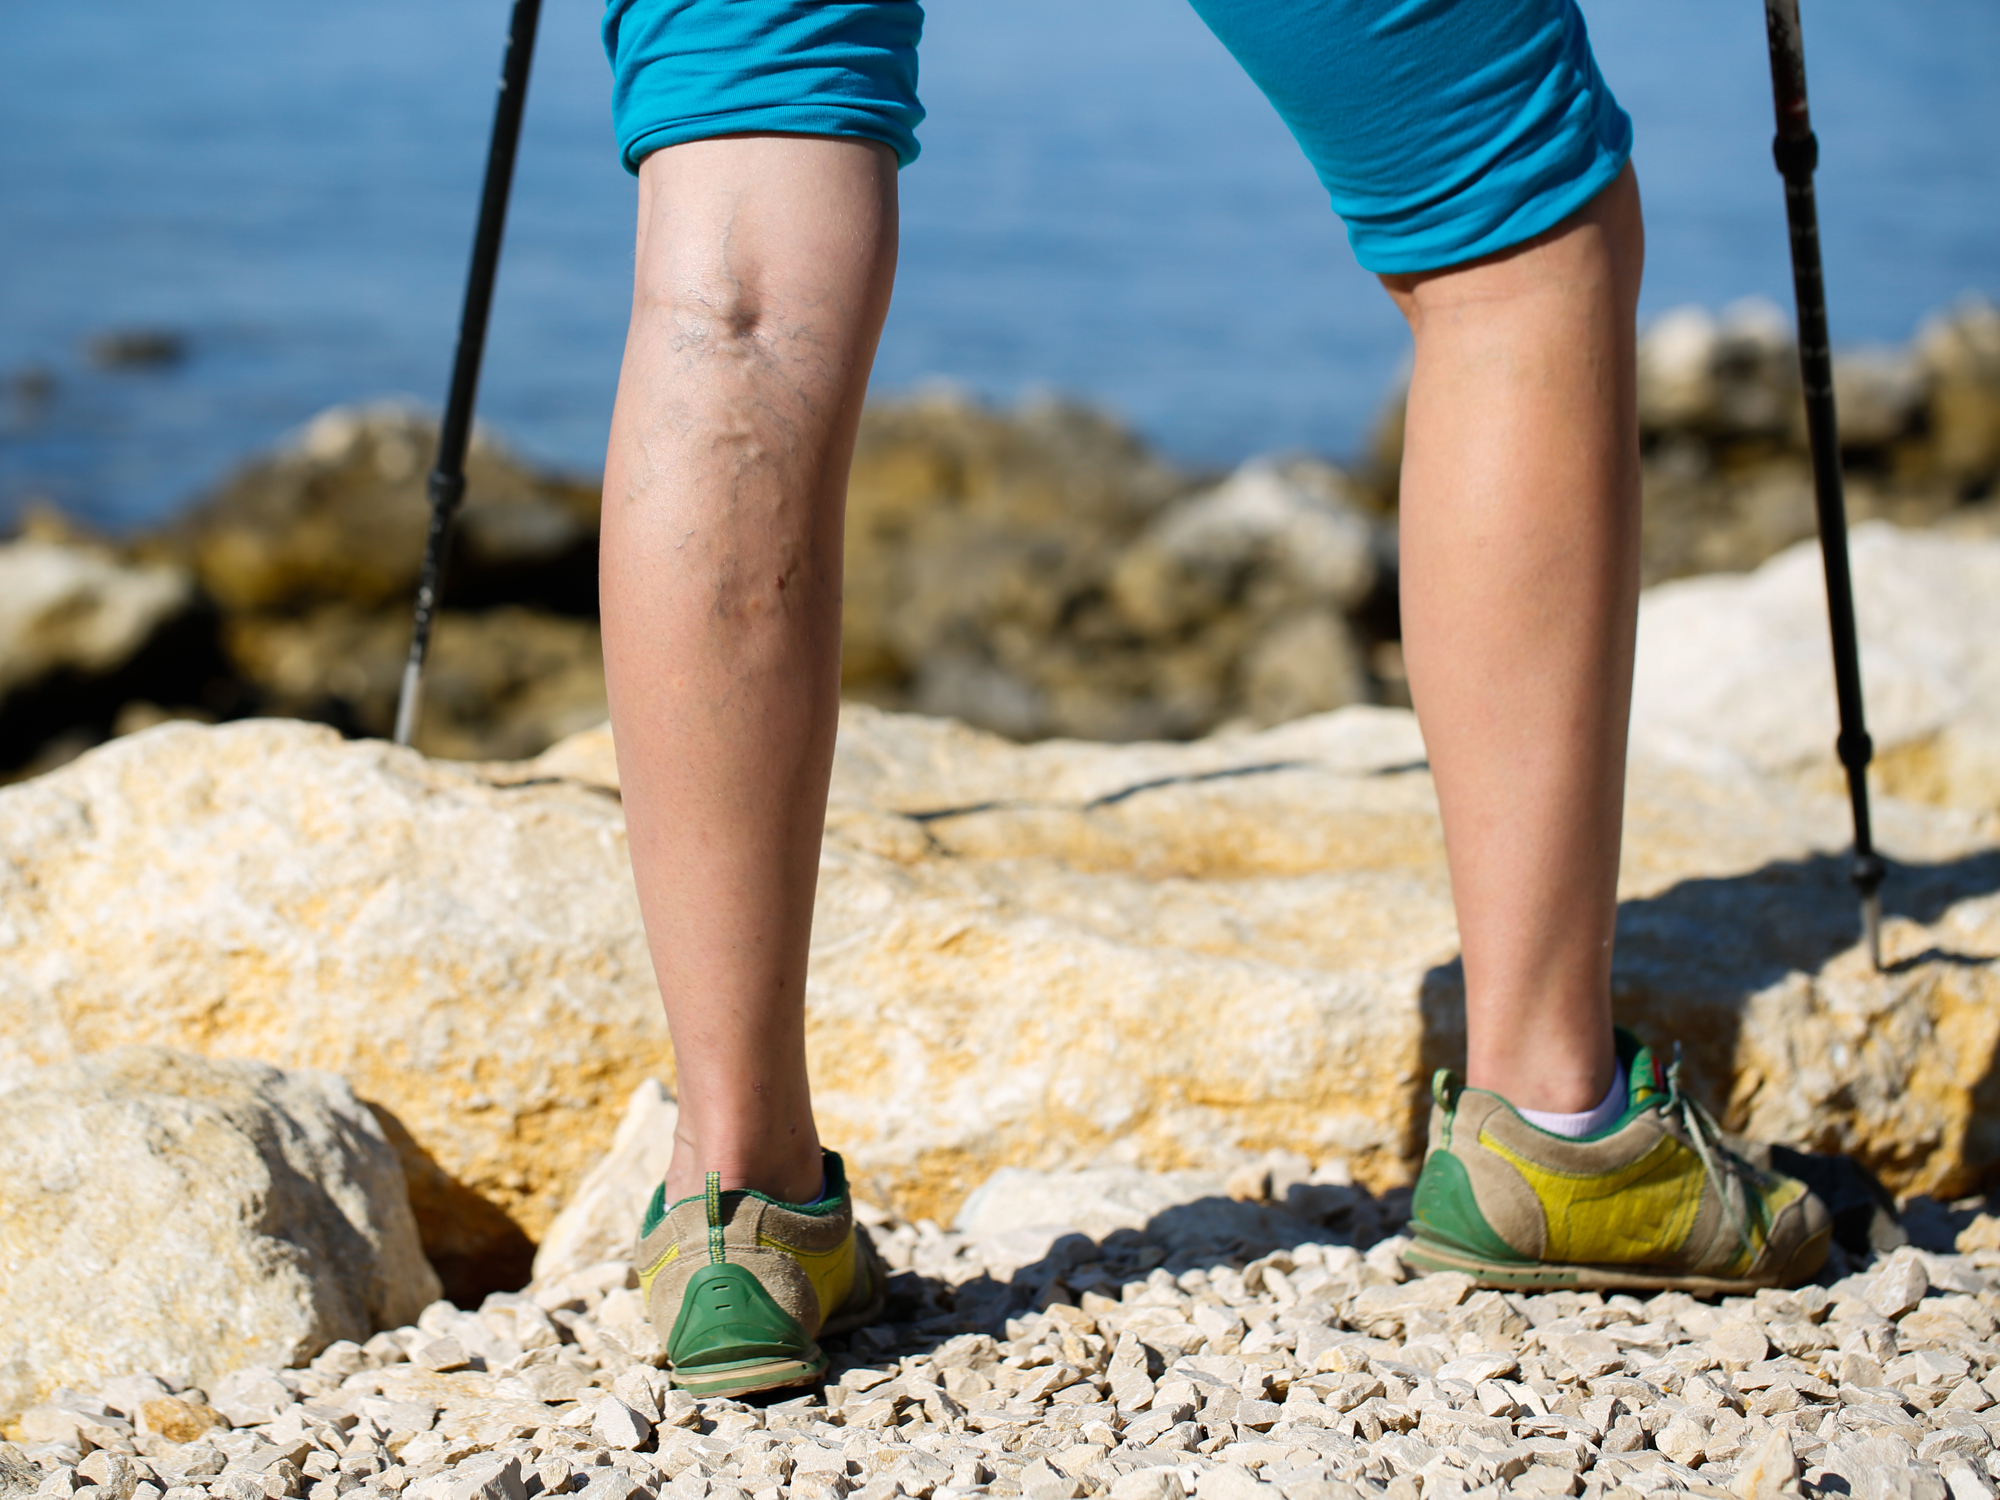 6 ways to make your varicose veins and blood clot risk vanish